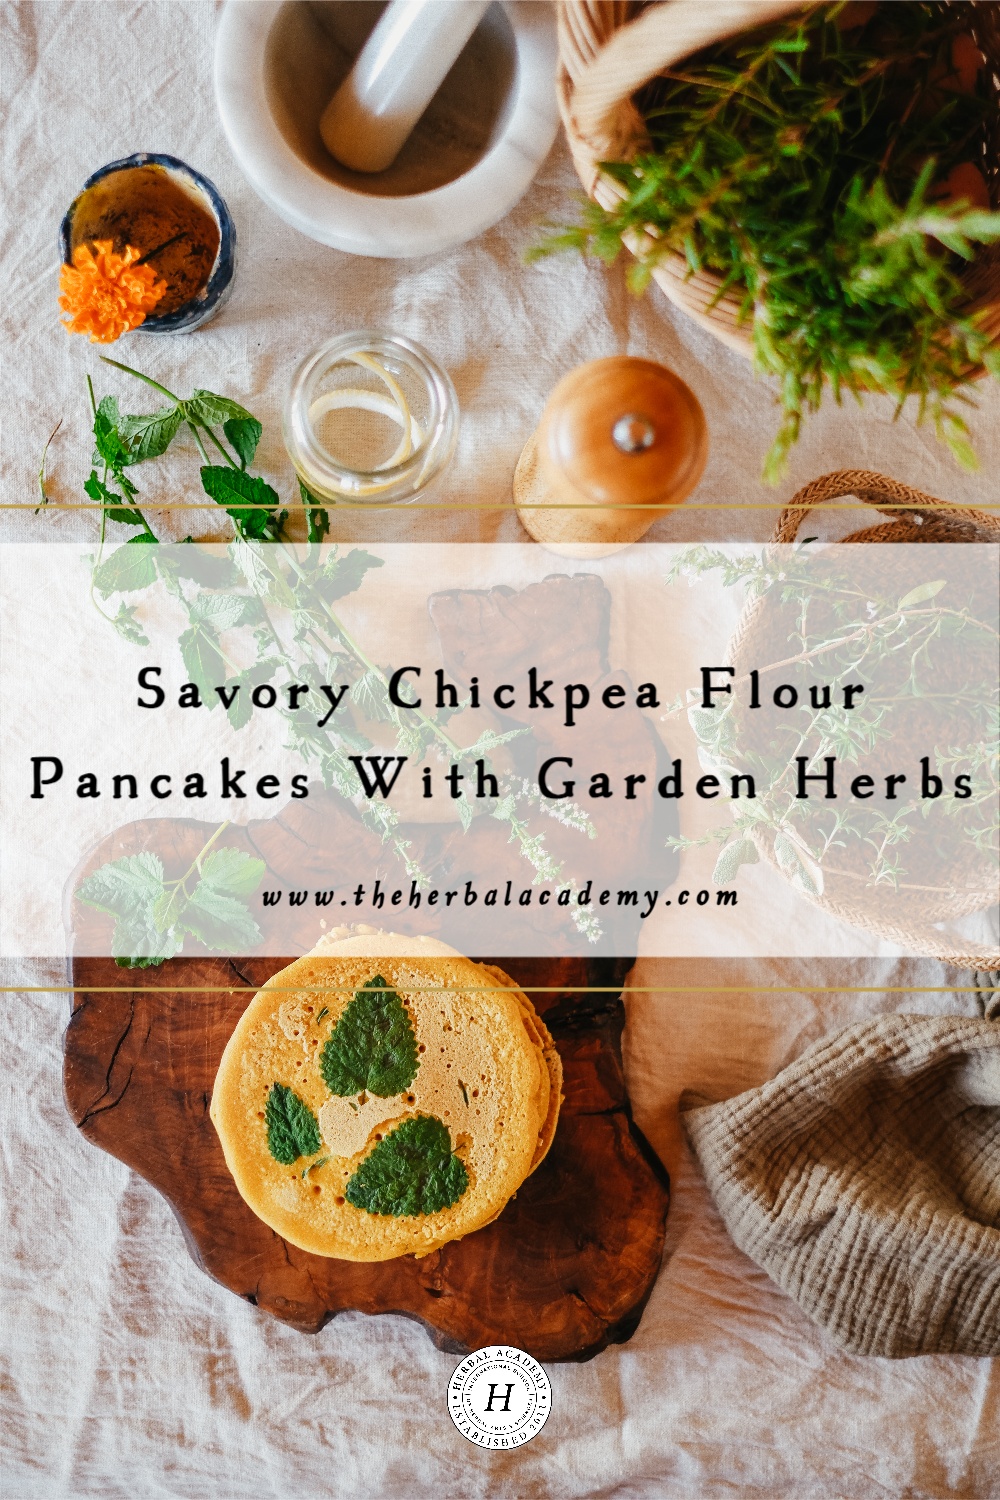 Savory Chickpea Flour Pancakes With Garden Herbs | Herbal Academy | Looking for a gluten-free, protein-rich, high-fiber alternative to pancakes? This chickpea flour pancake recipe may become a new favorite!